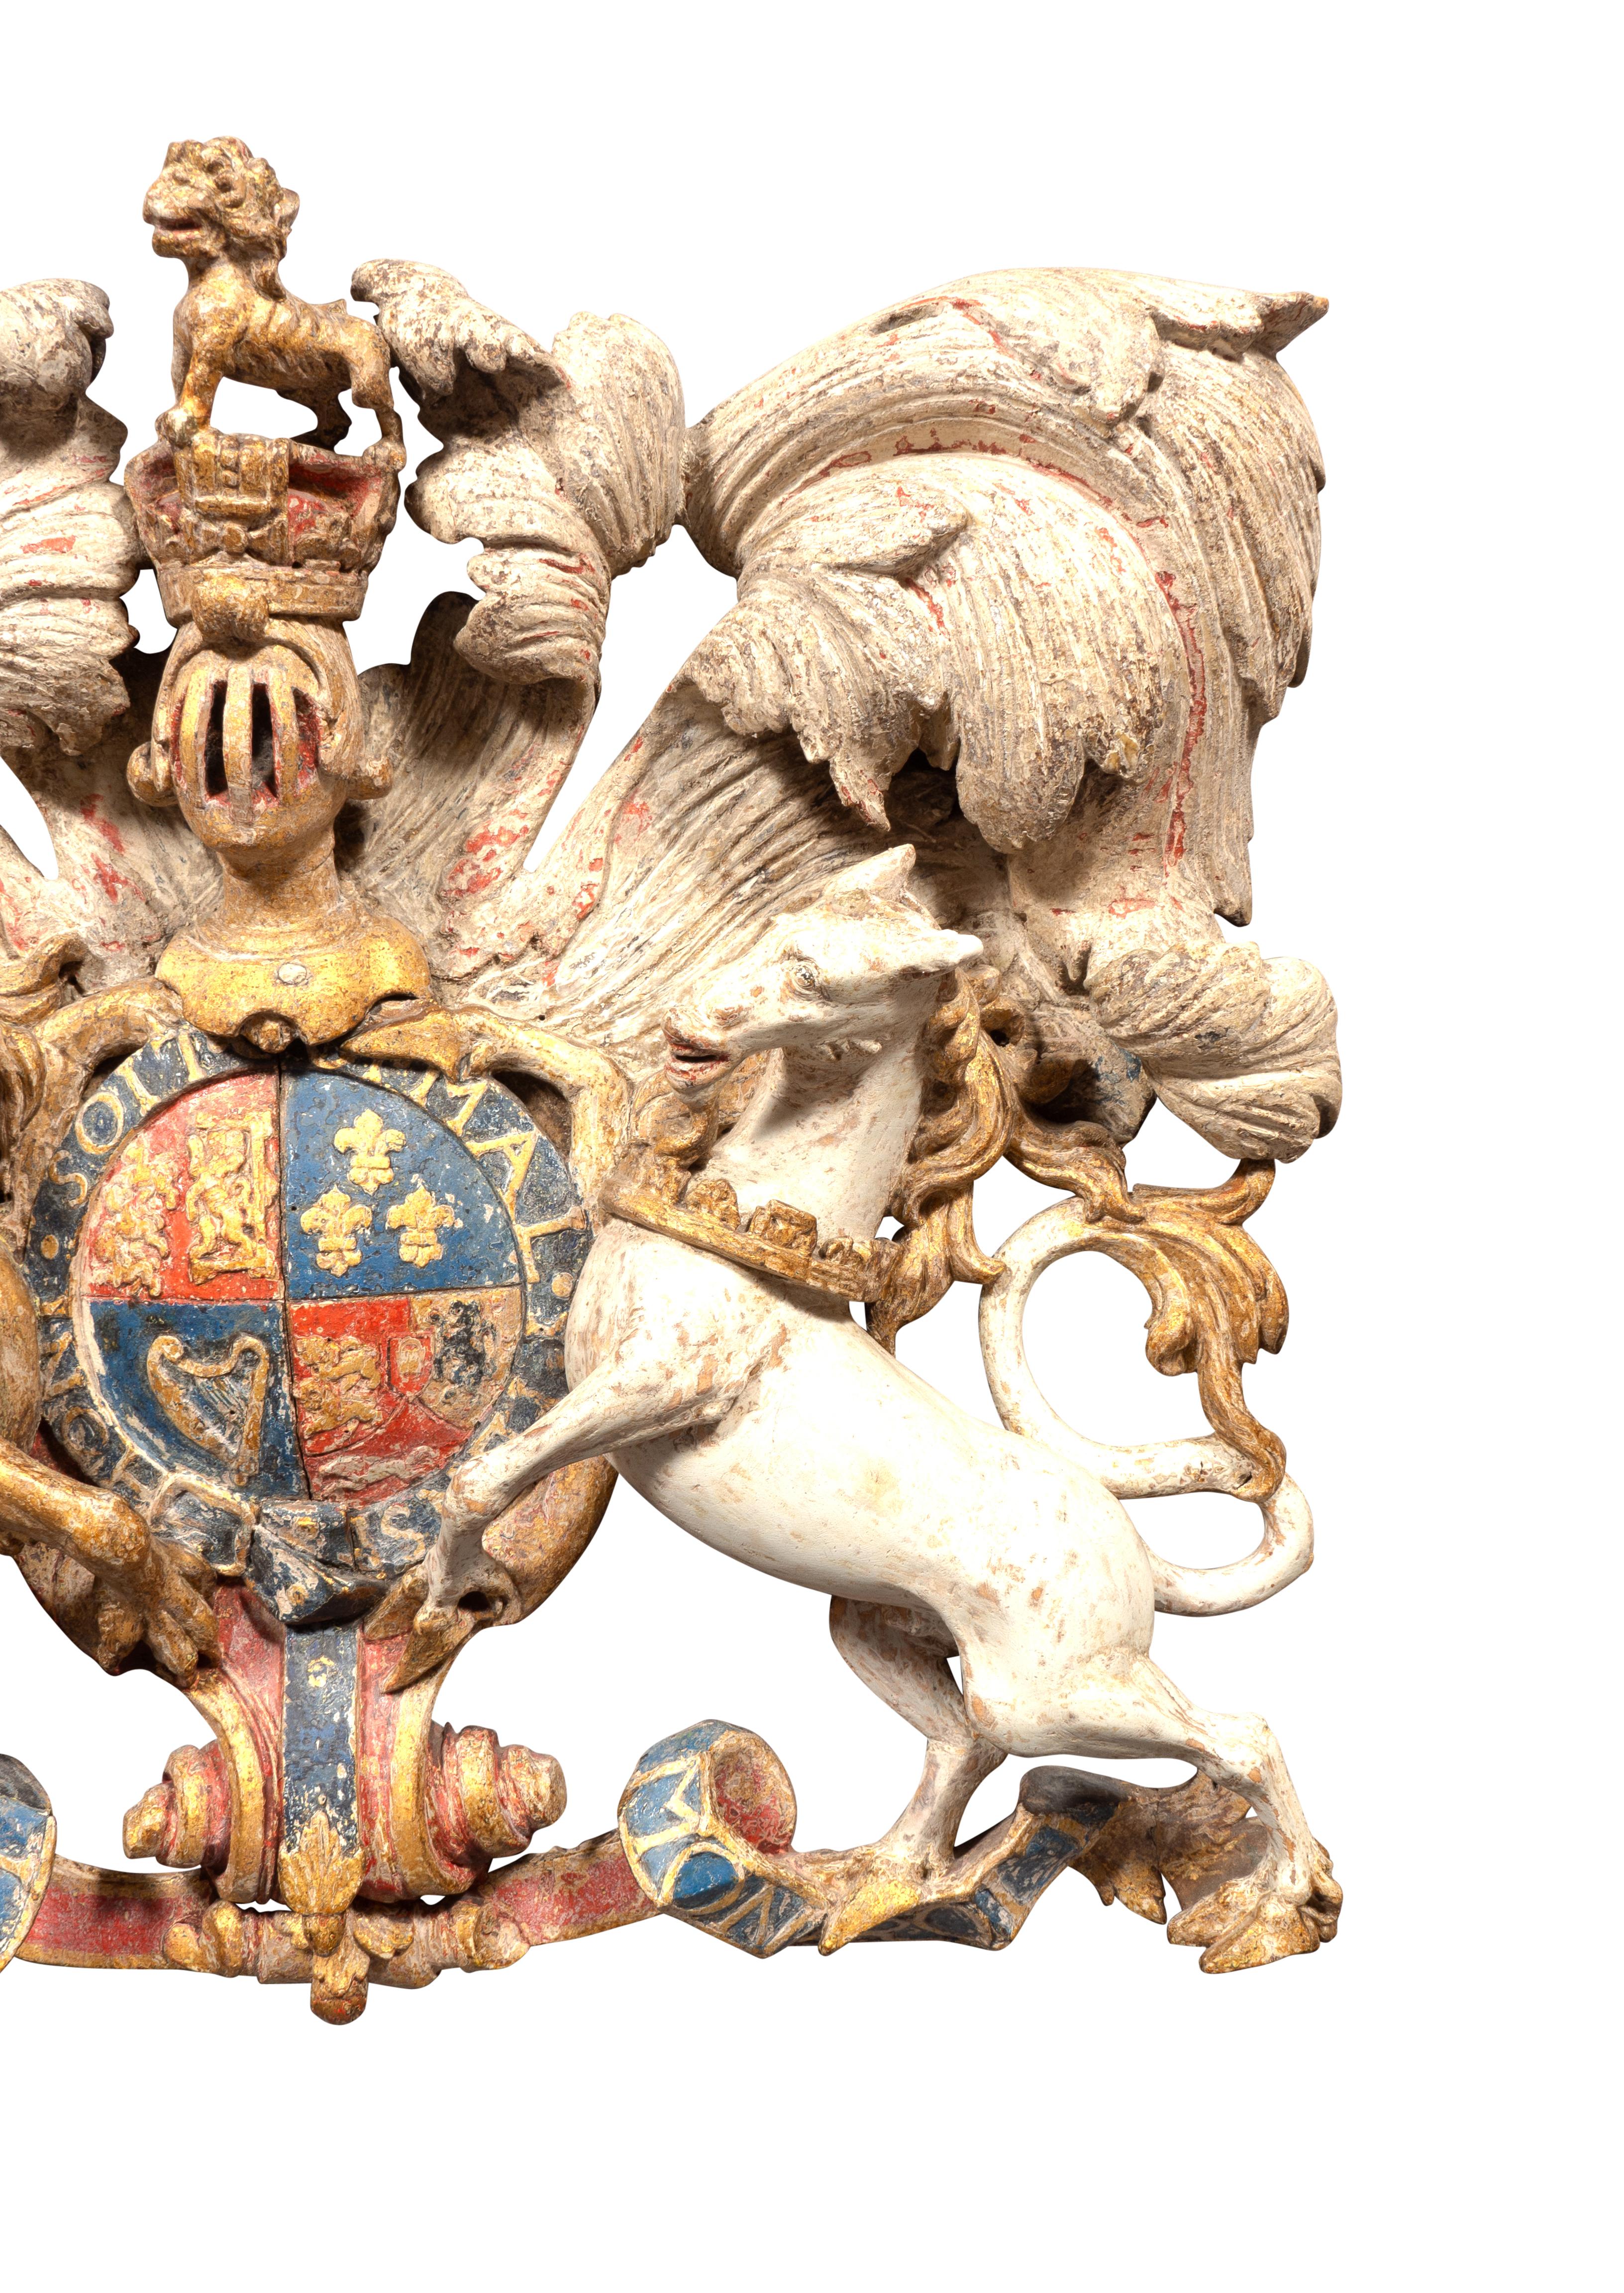 English George III Painted Coat Of Arms Representing The Kingdom Of Great Britain